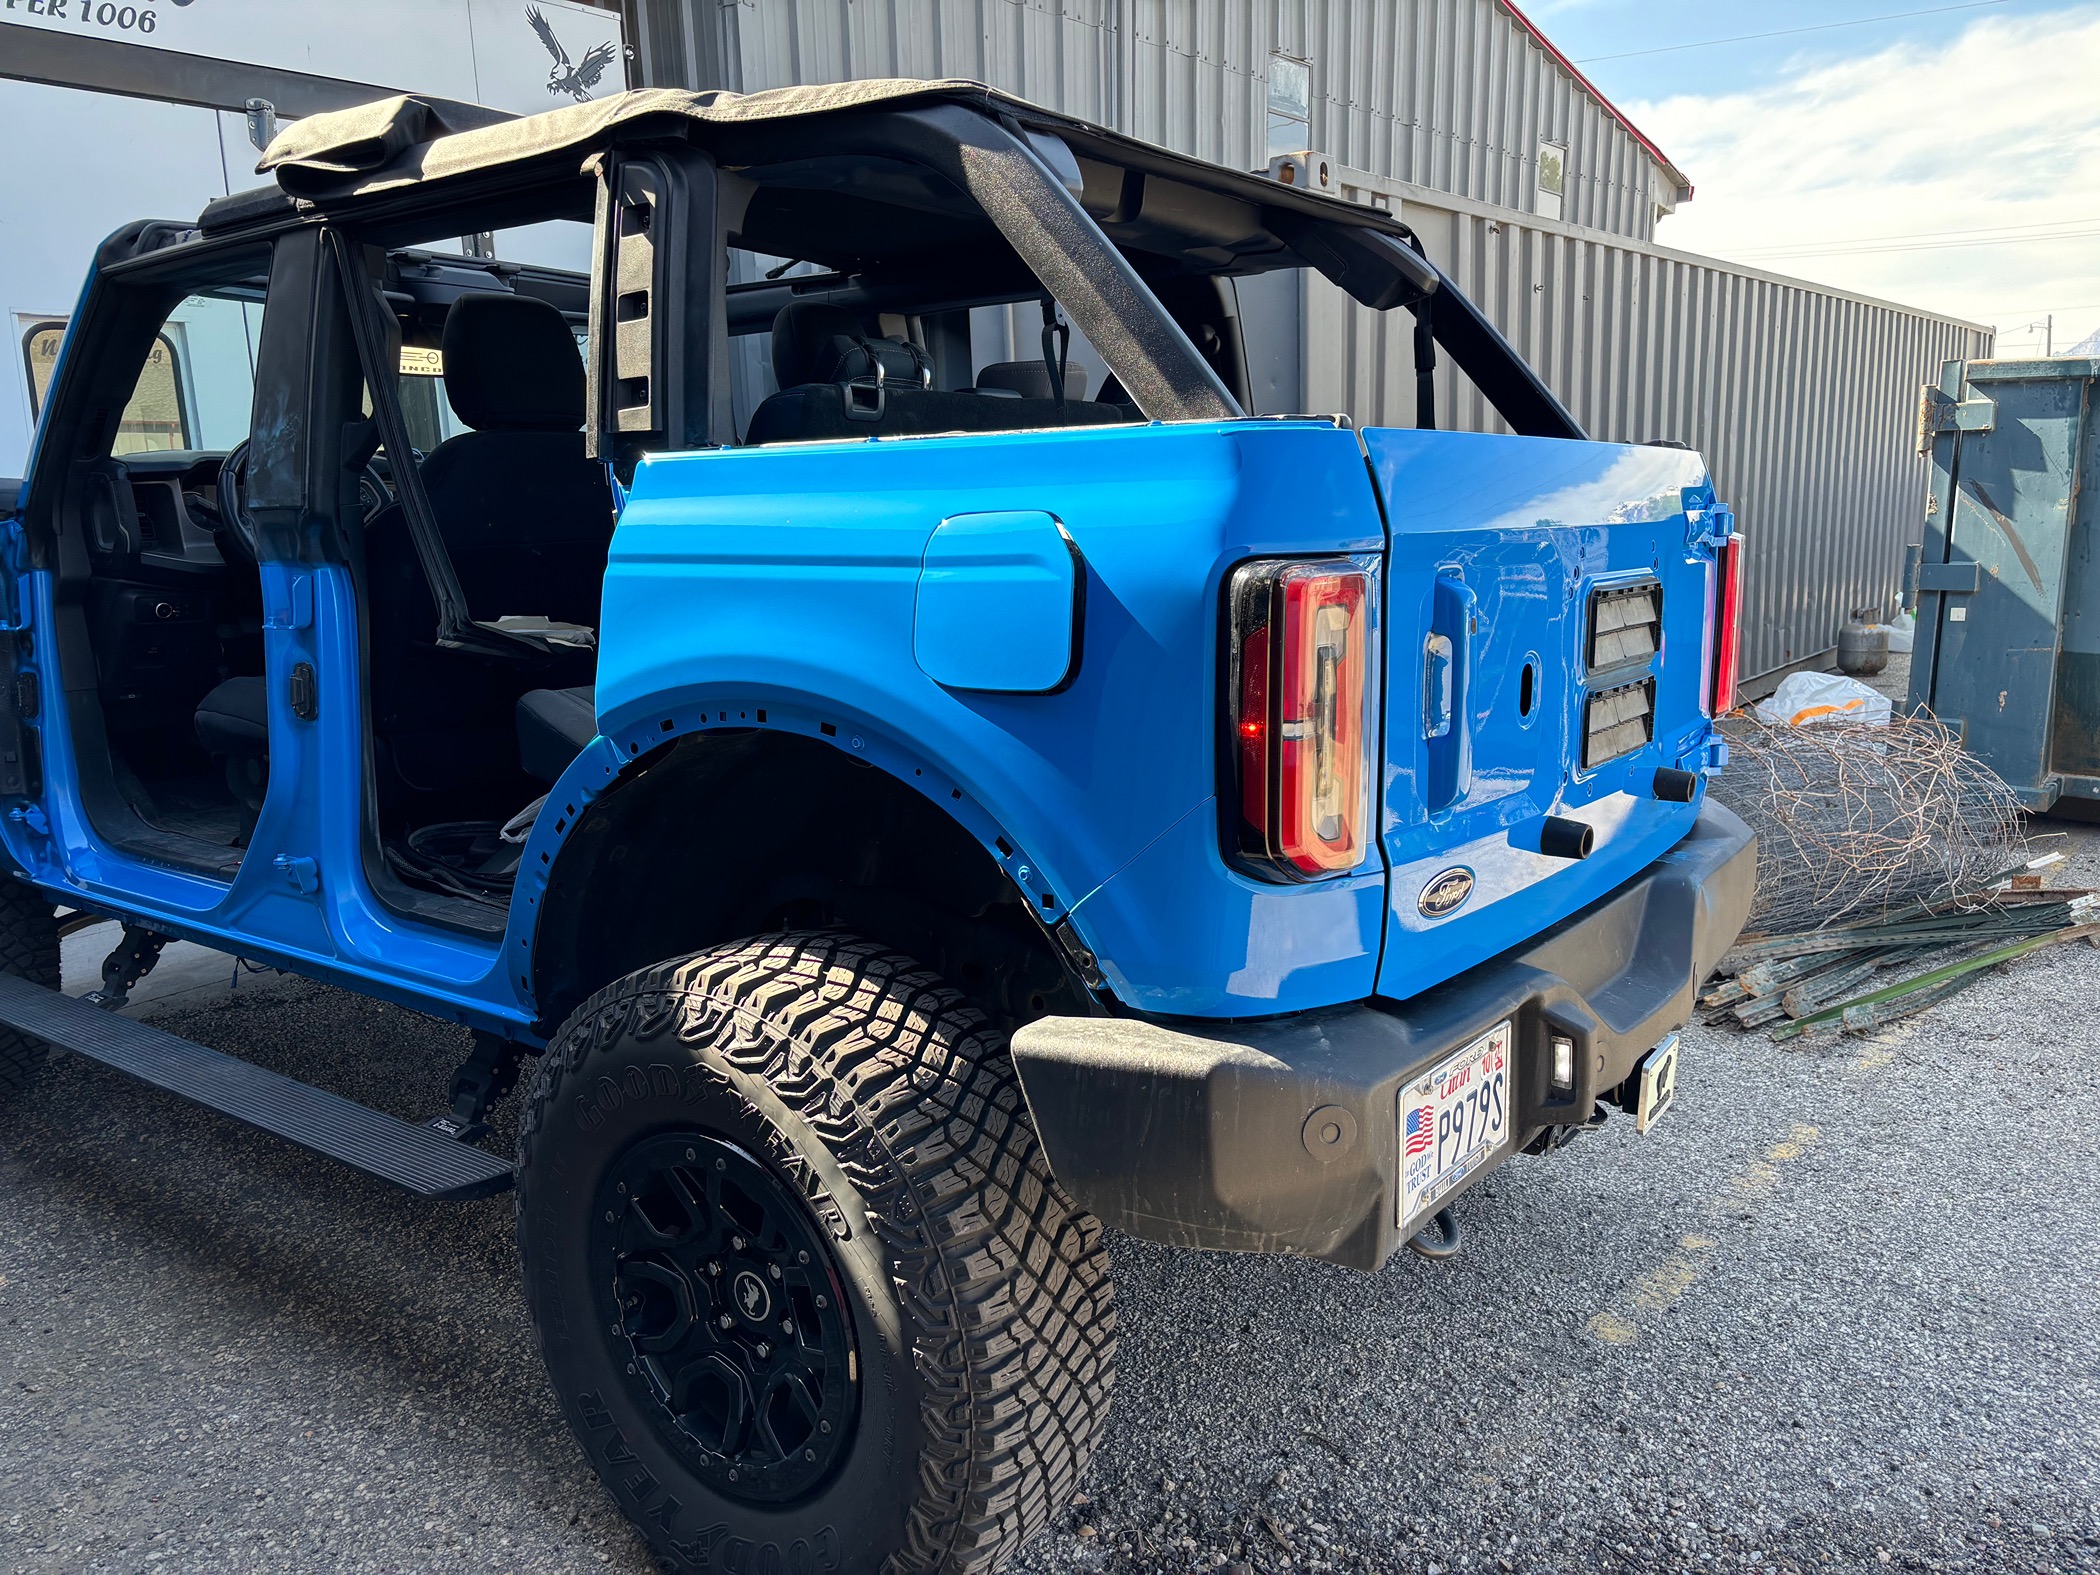 Ford Bronco Finally finished my Grabber Blue Bronco custom repaint! 😁 IMG_0761